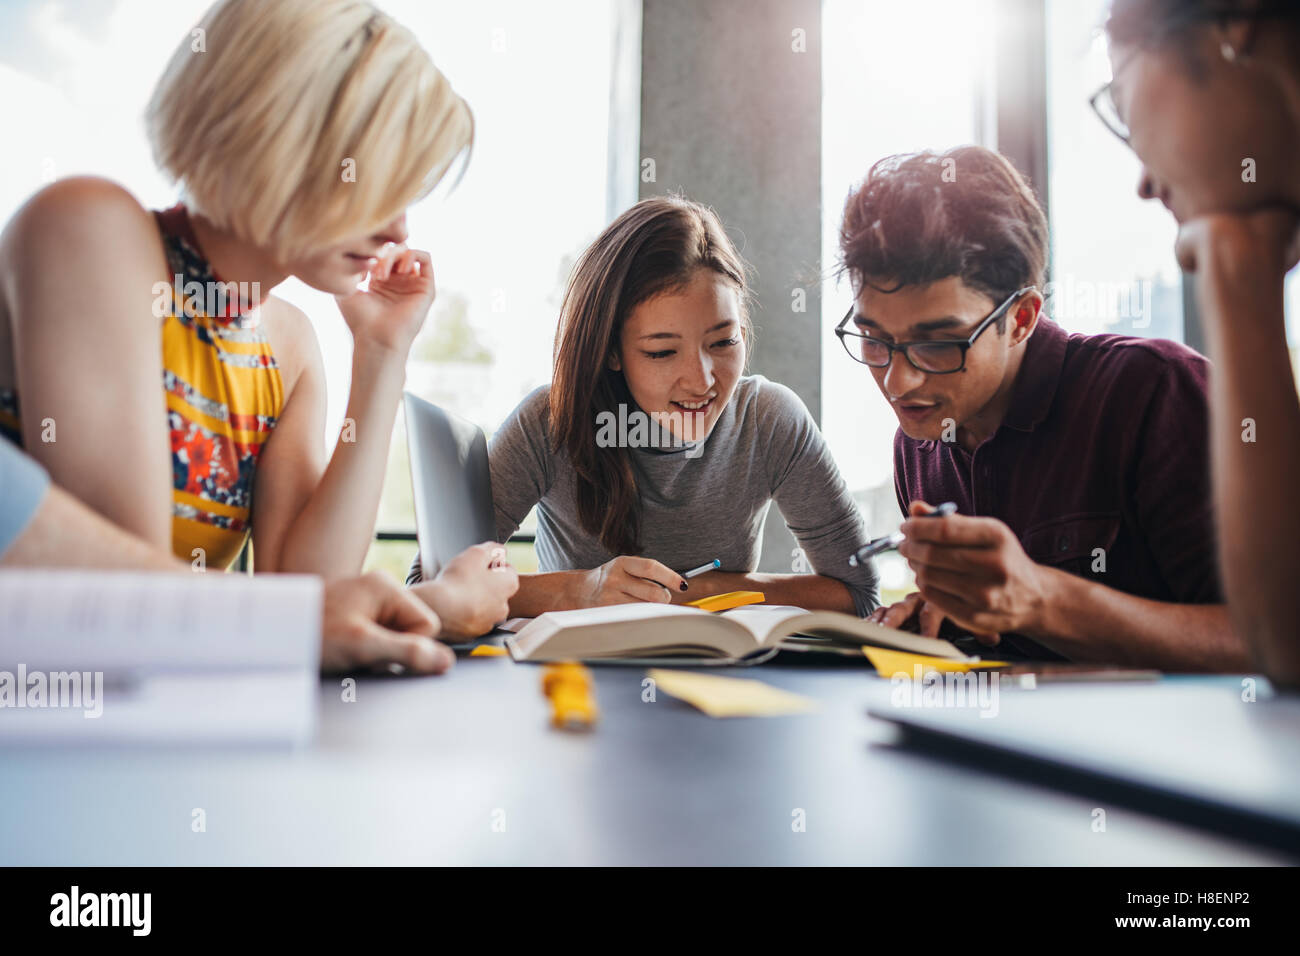 Group of young students working on school assignment in library. Multiethnic young people sitting at table reading reference boo Stock Photo